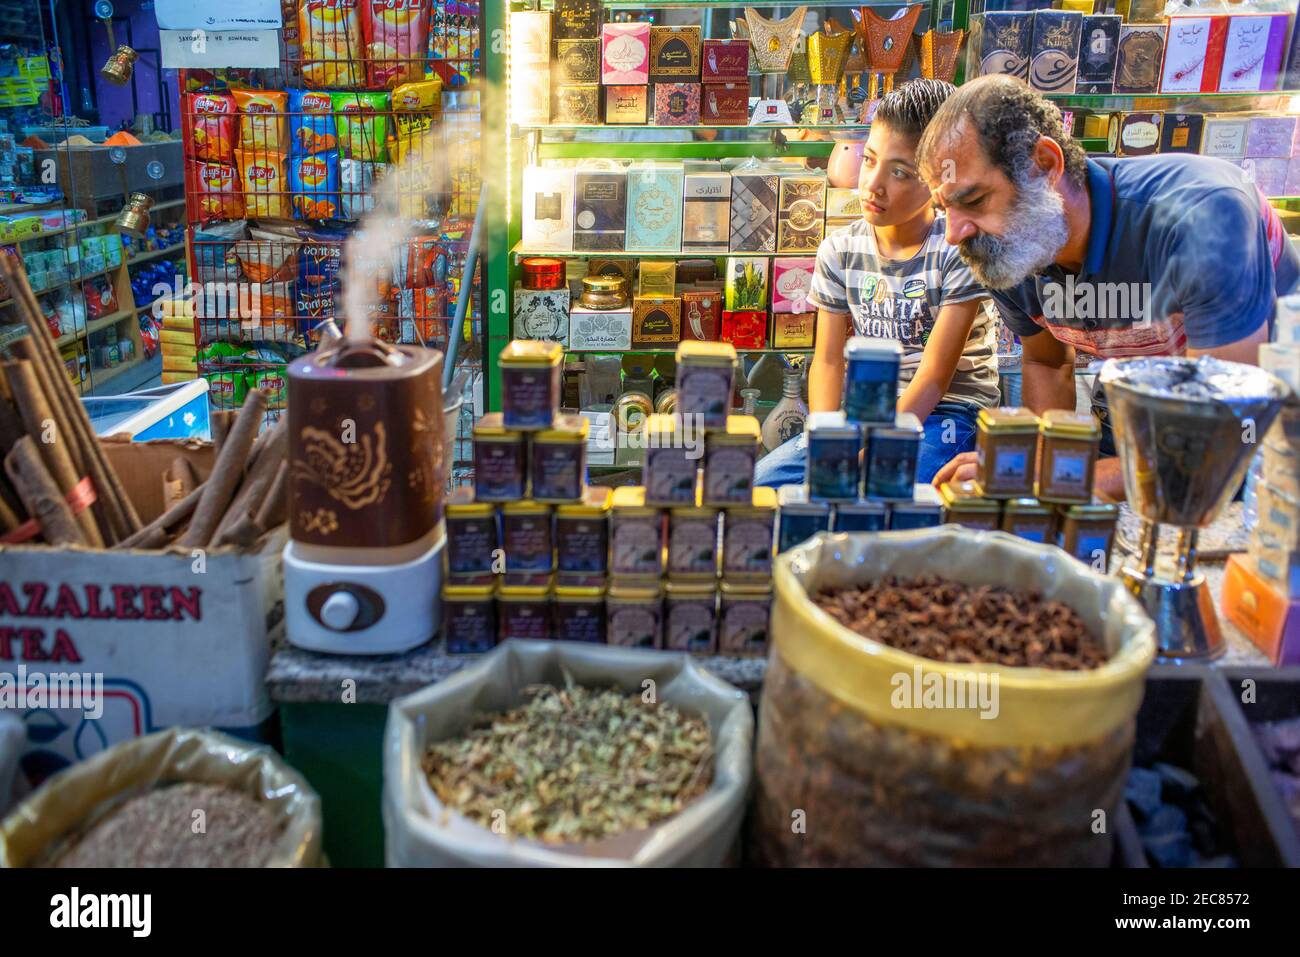 A local perfumer prepares perfume at a traditional Middle Eastern fragrance shop in downtown Amman, Jordan. Shops and stores in the old city of Amman, Stock Photo